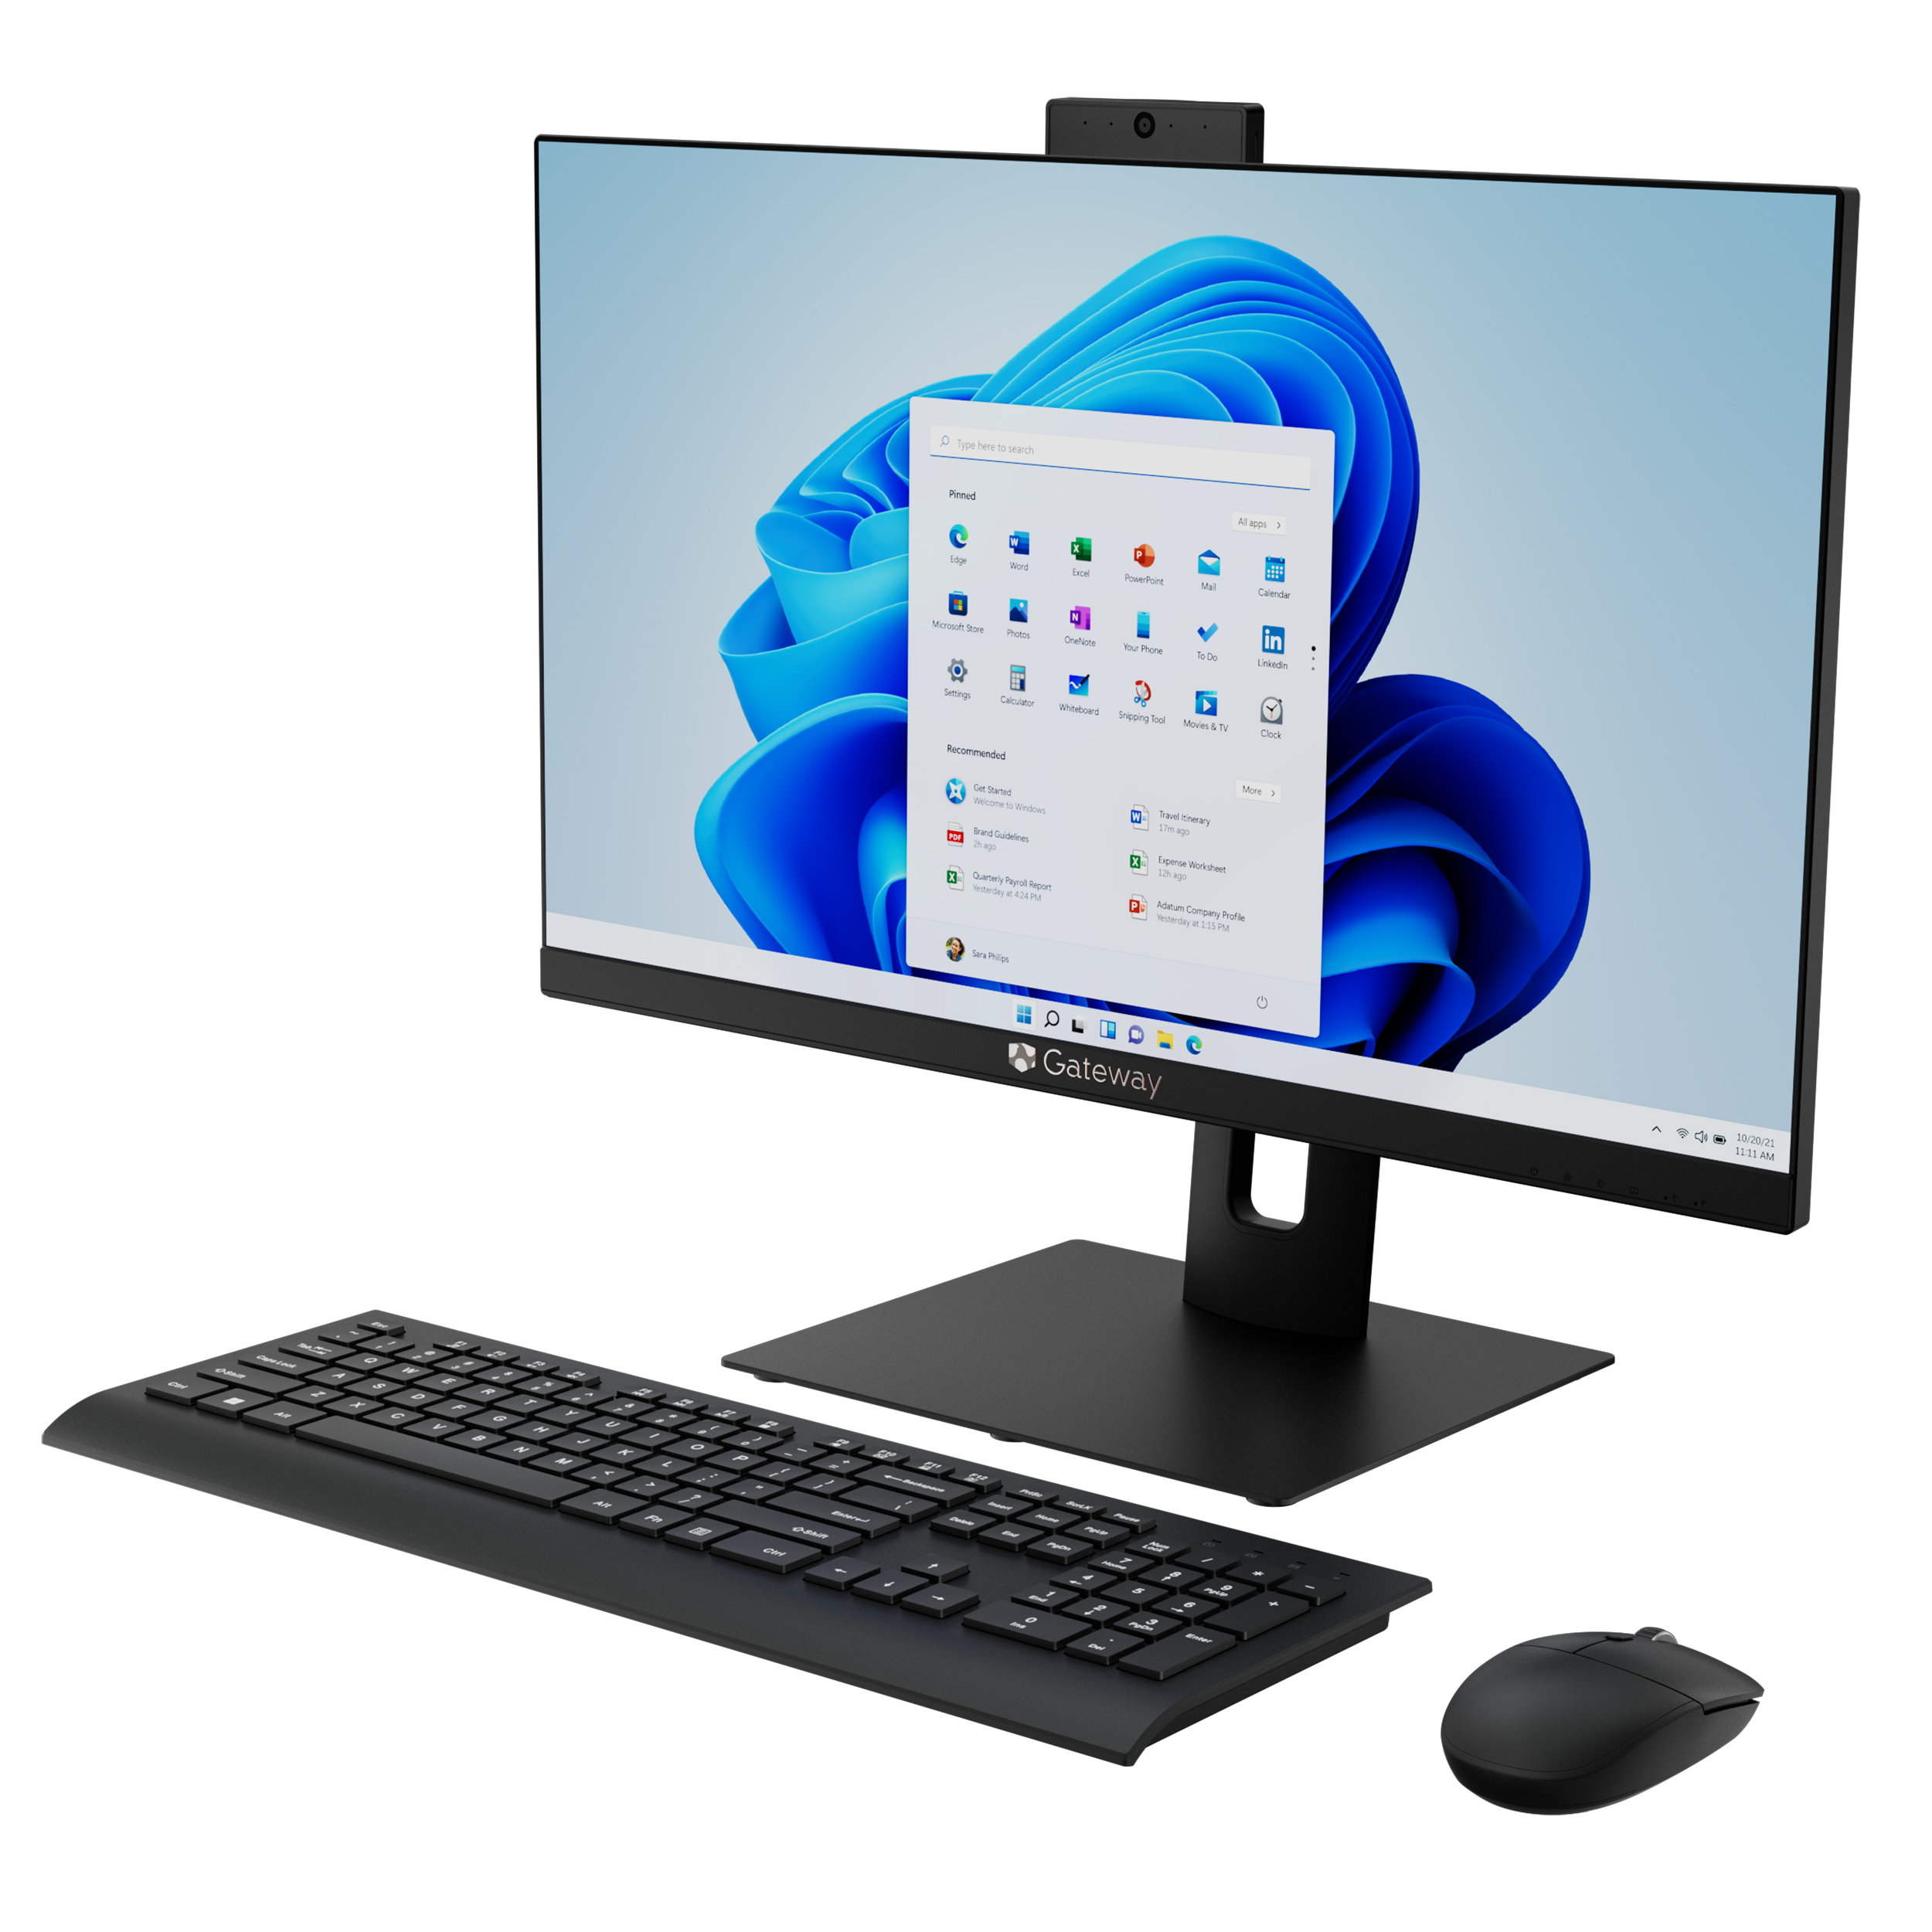 Gateway 23.8" All-in-one Desktop, Fully Adjustable Stand, FHD, Intel Pentium J5040, 4GB RAM, 128GB SSD, 2MP Camera, Windows 11, Microsoft 365 Personal 1-Year Included, Mouse & Keyboard Included, Black - image 5 of 11